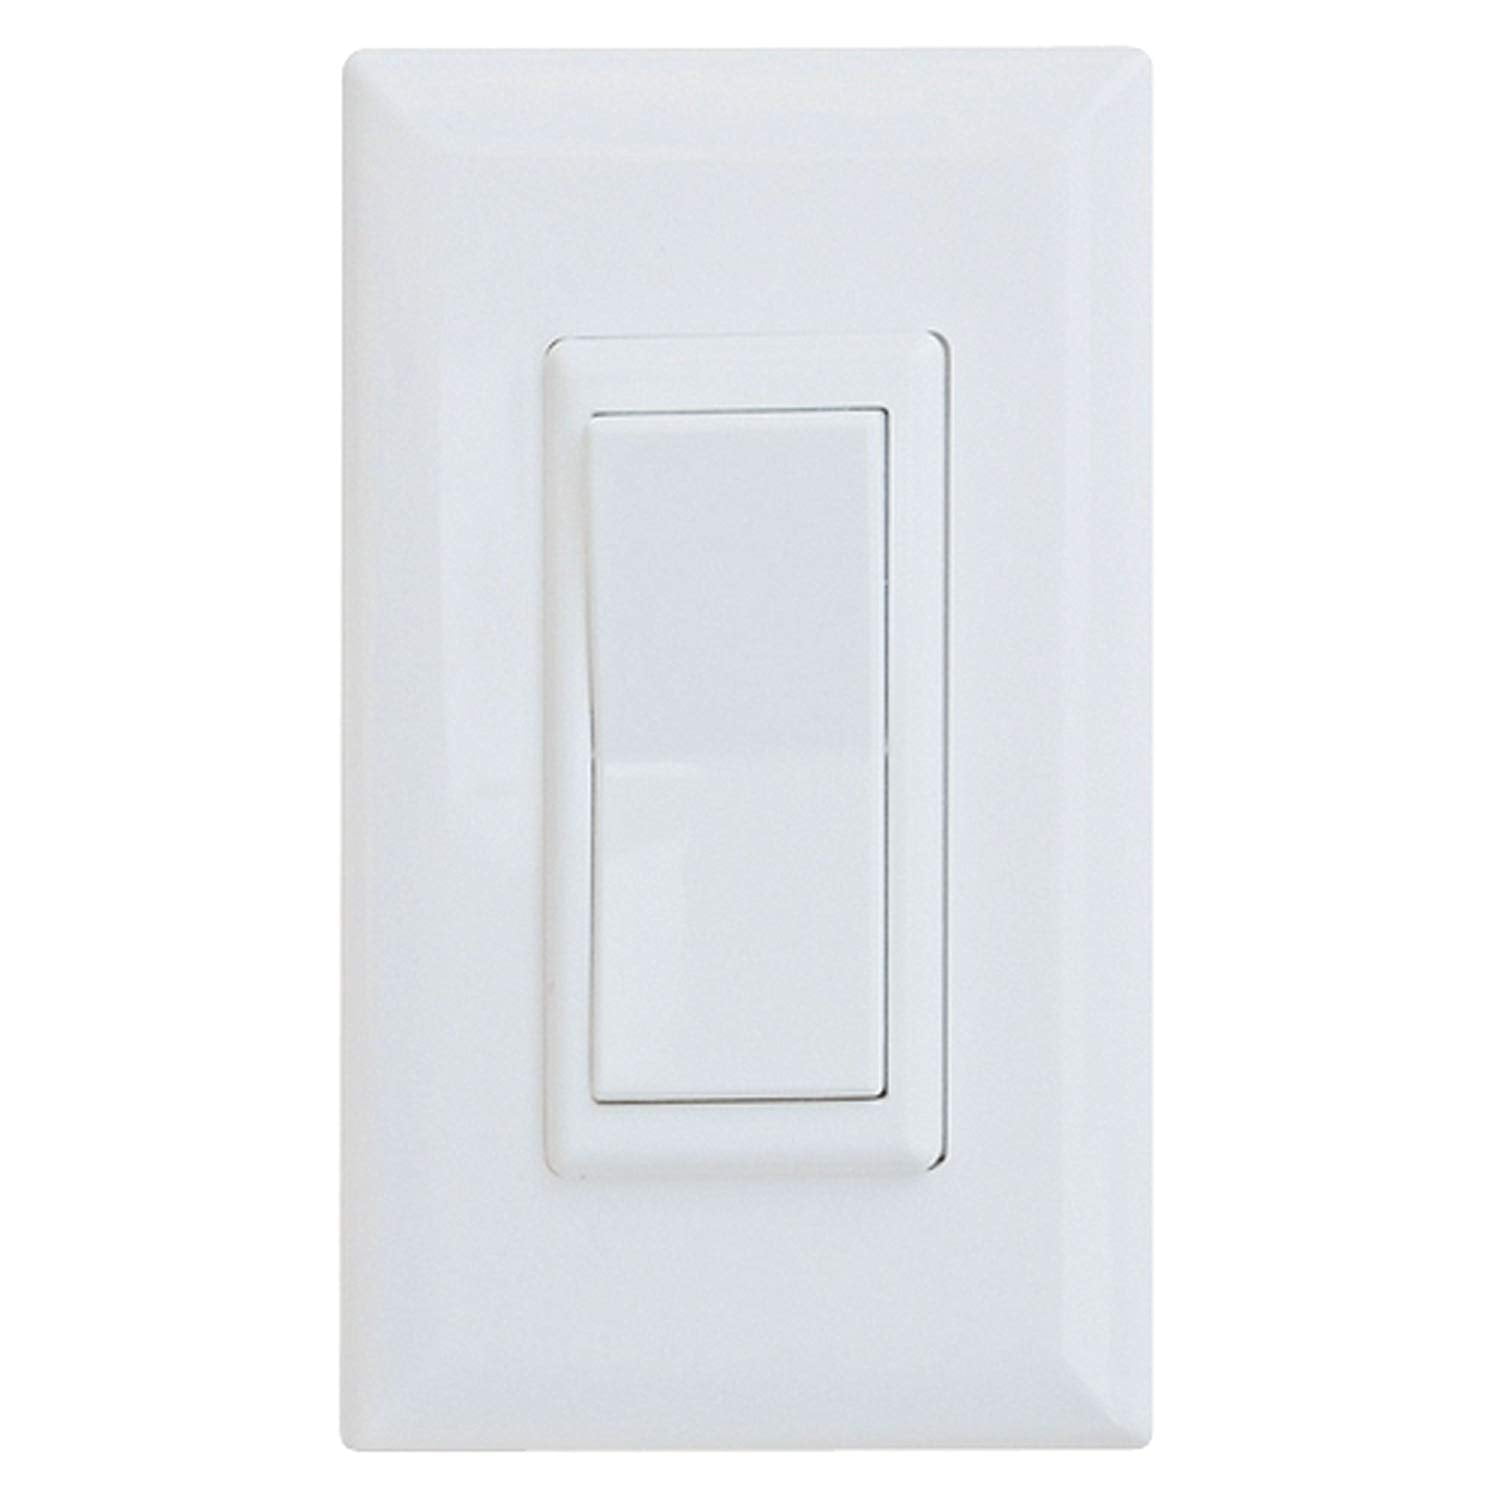 Mobile Home RV Parts Self Contained Wall Switch Includes Cover Plate White 